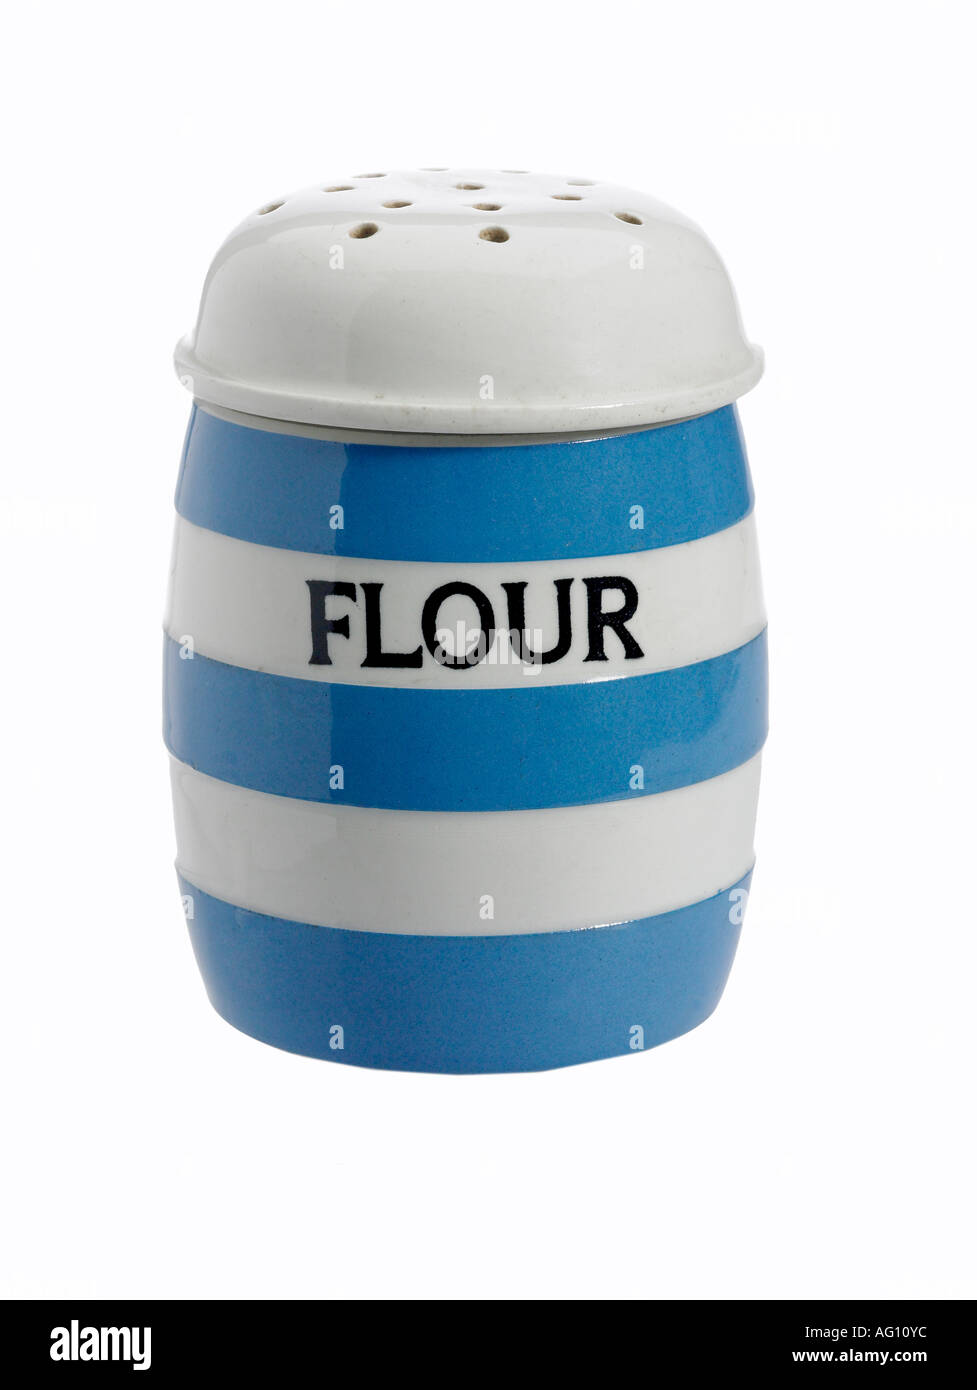 country classic blue and white kitchen ware flour shaker Stock Photo